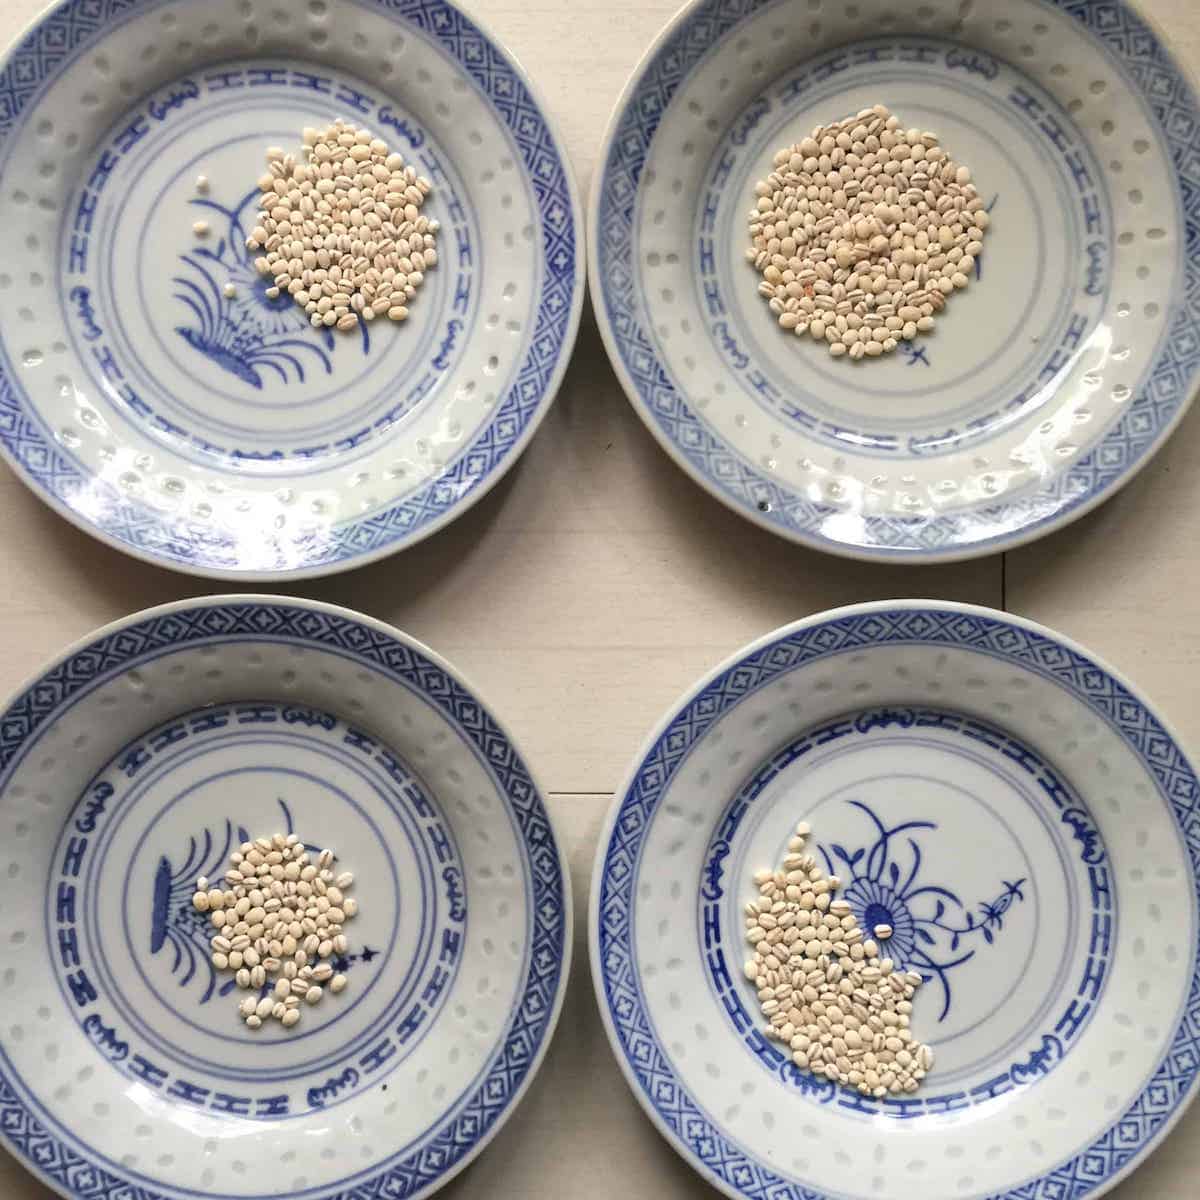 Comparing pearl barley toasted for different times